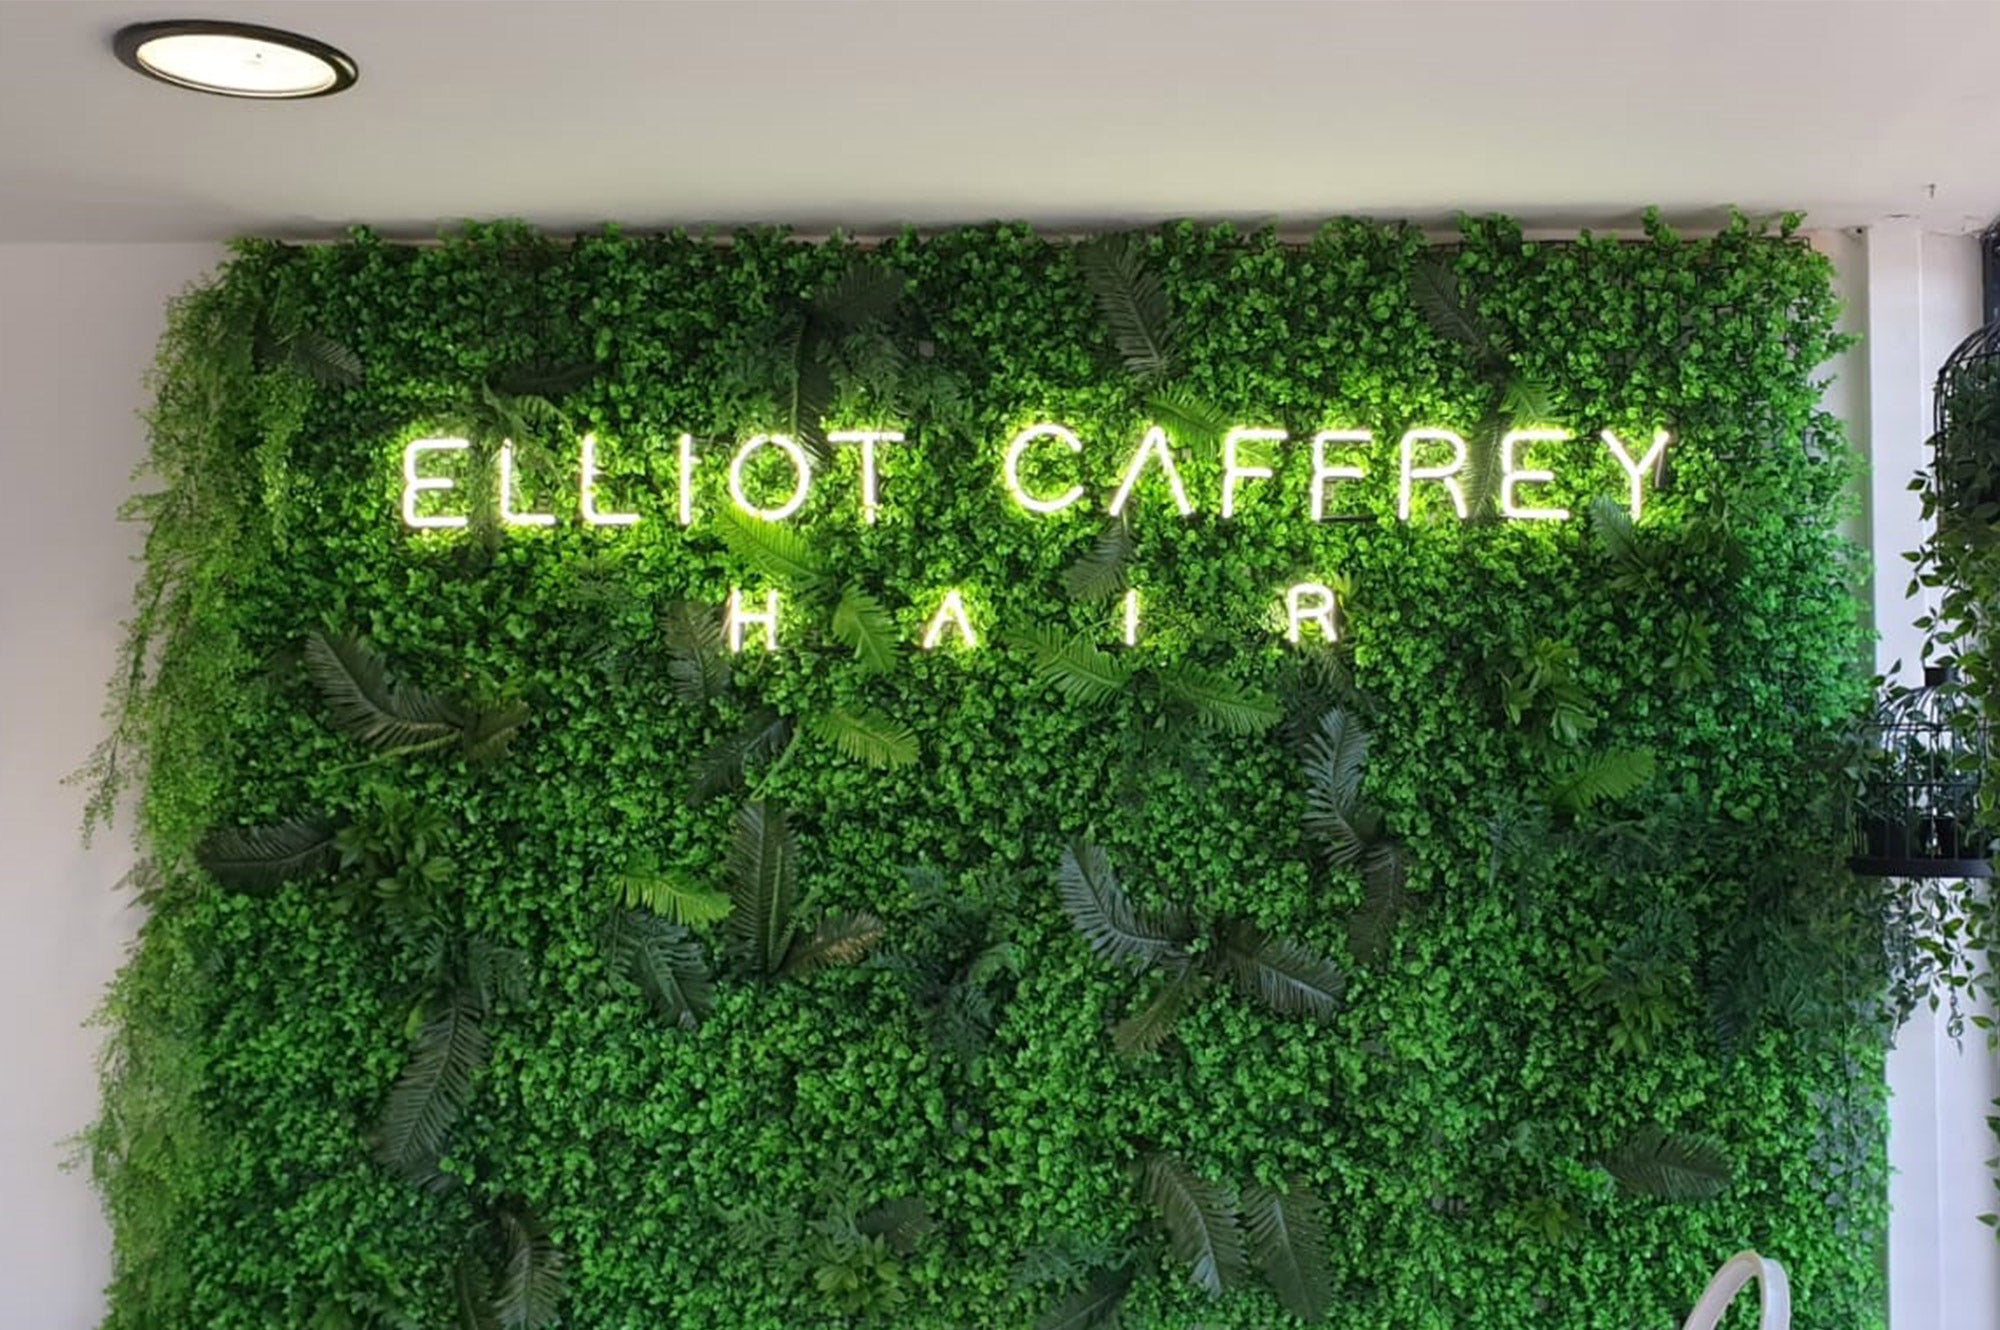 ELLIOT CAFFREY HAIR' white neon sign. Real glass neon fitted directly onto artificial foliage.